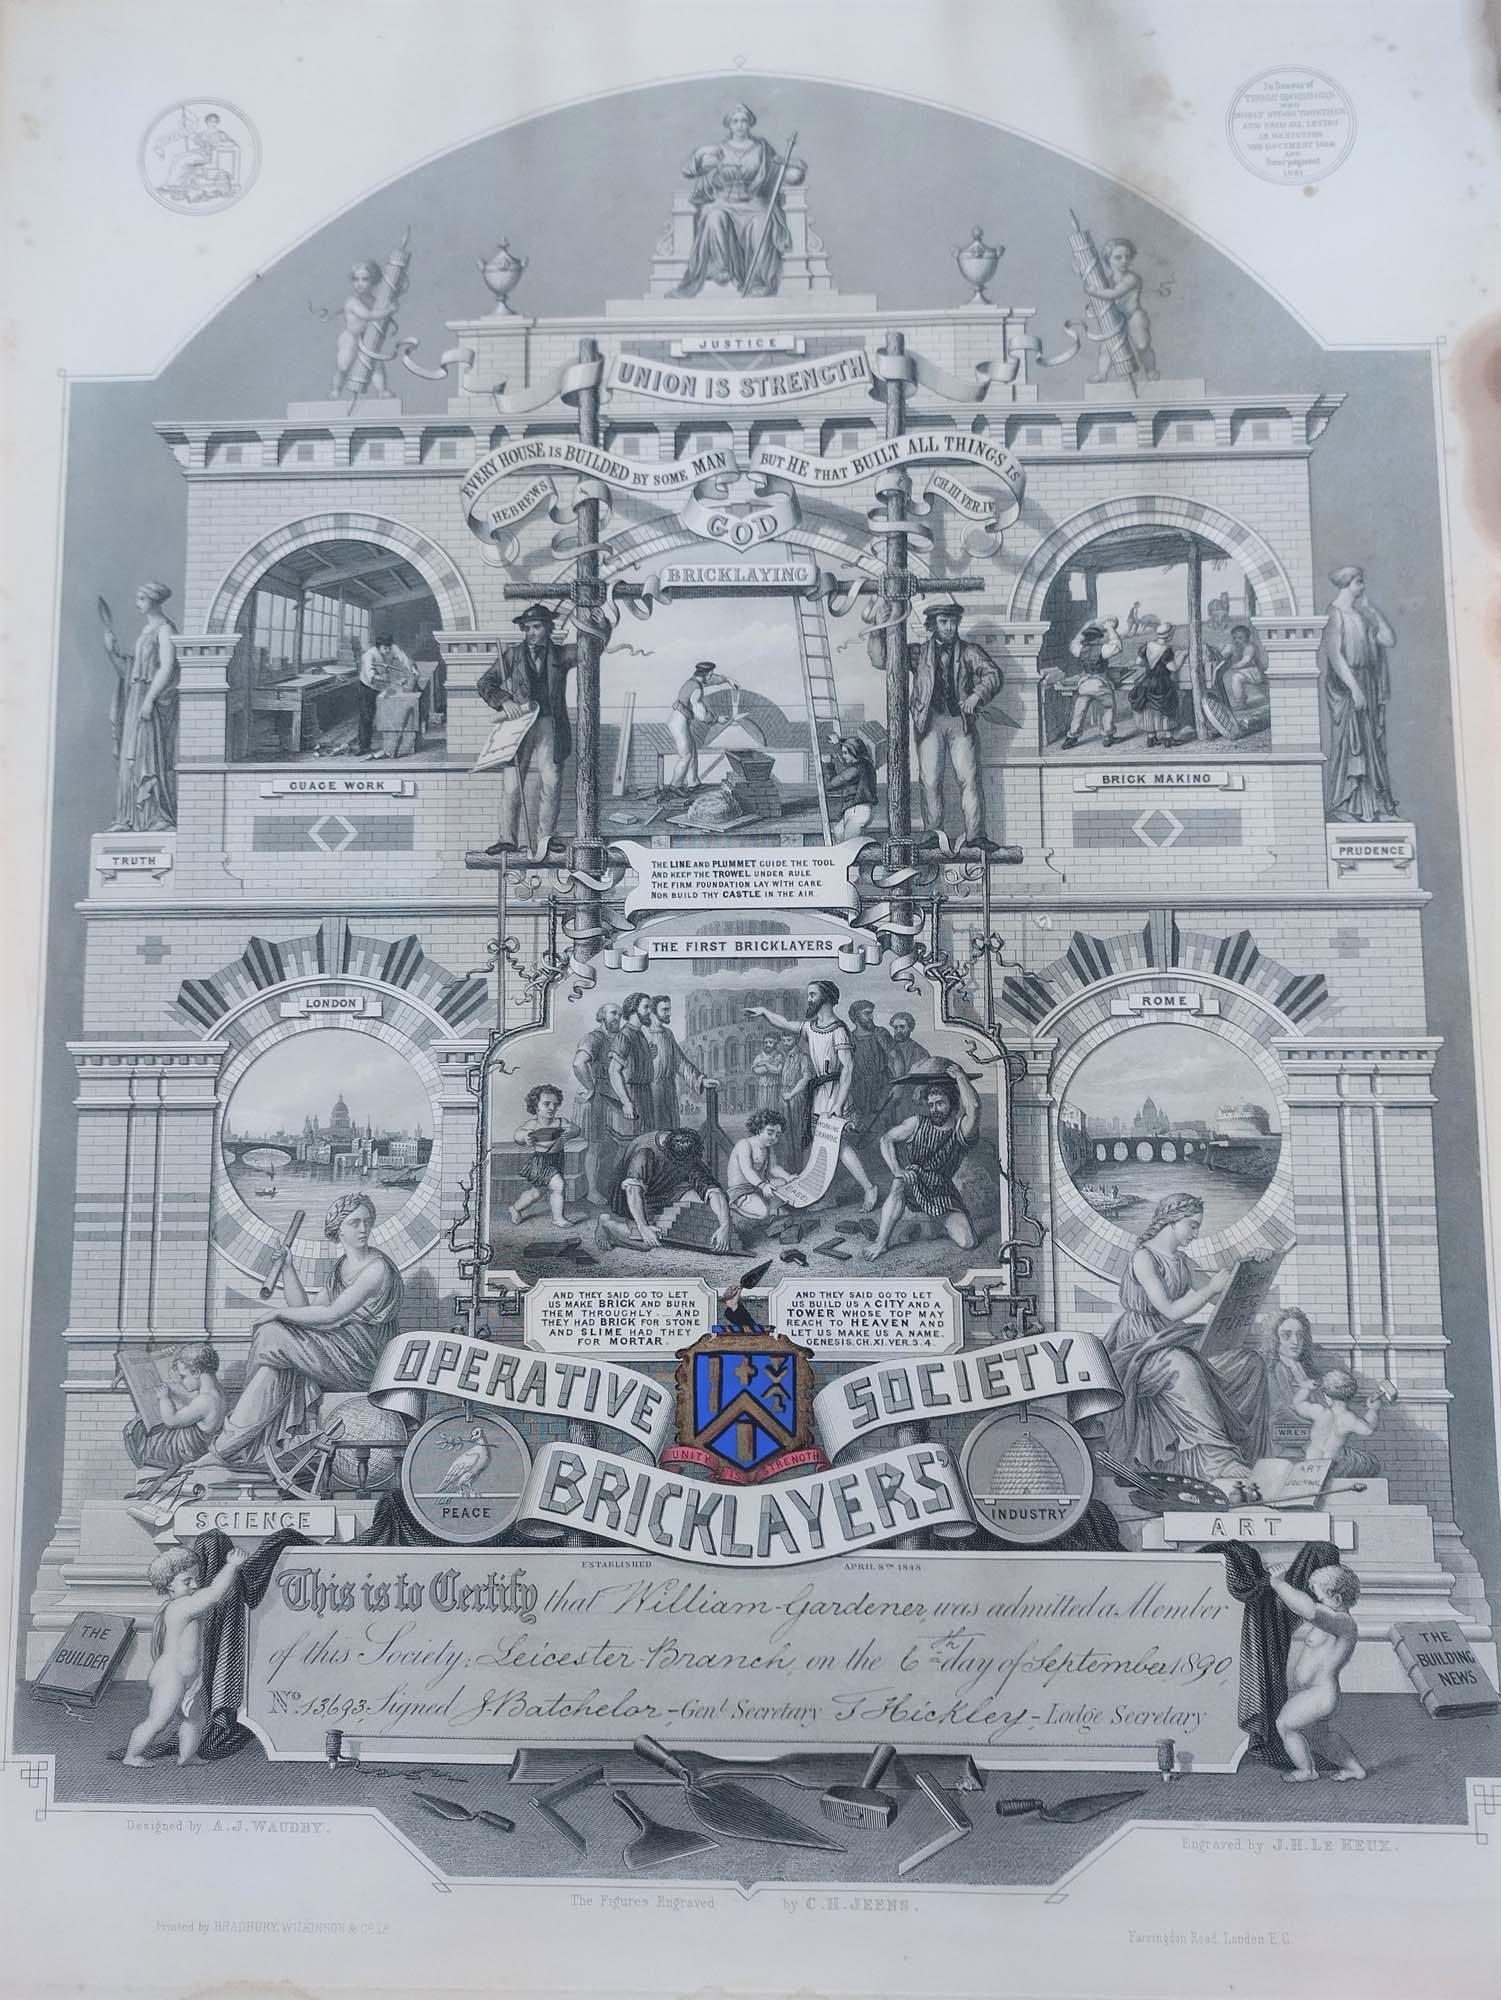 Membership certificate for the Operative Bricklayers’ Society